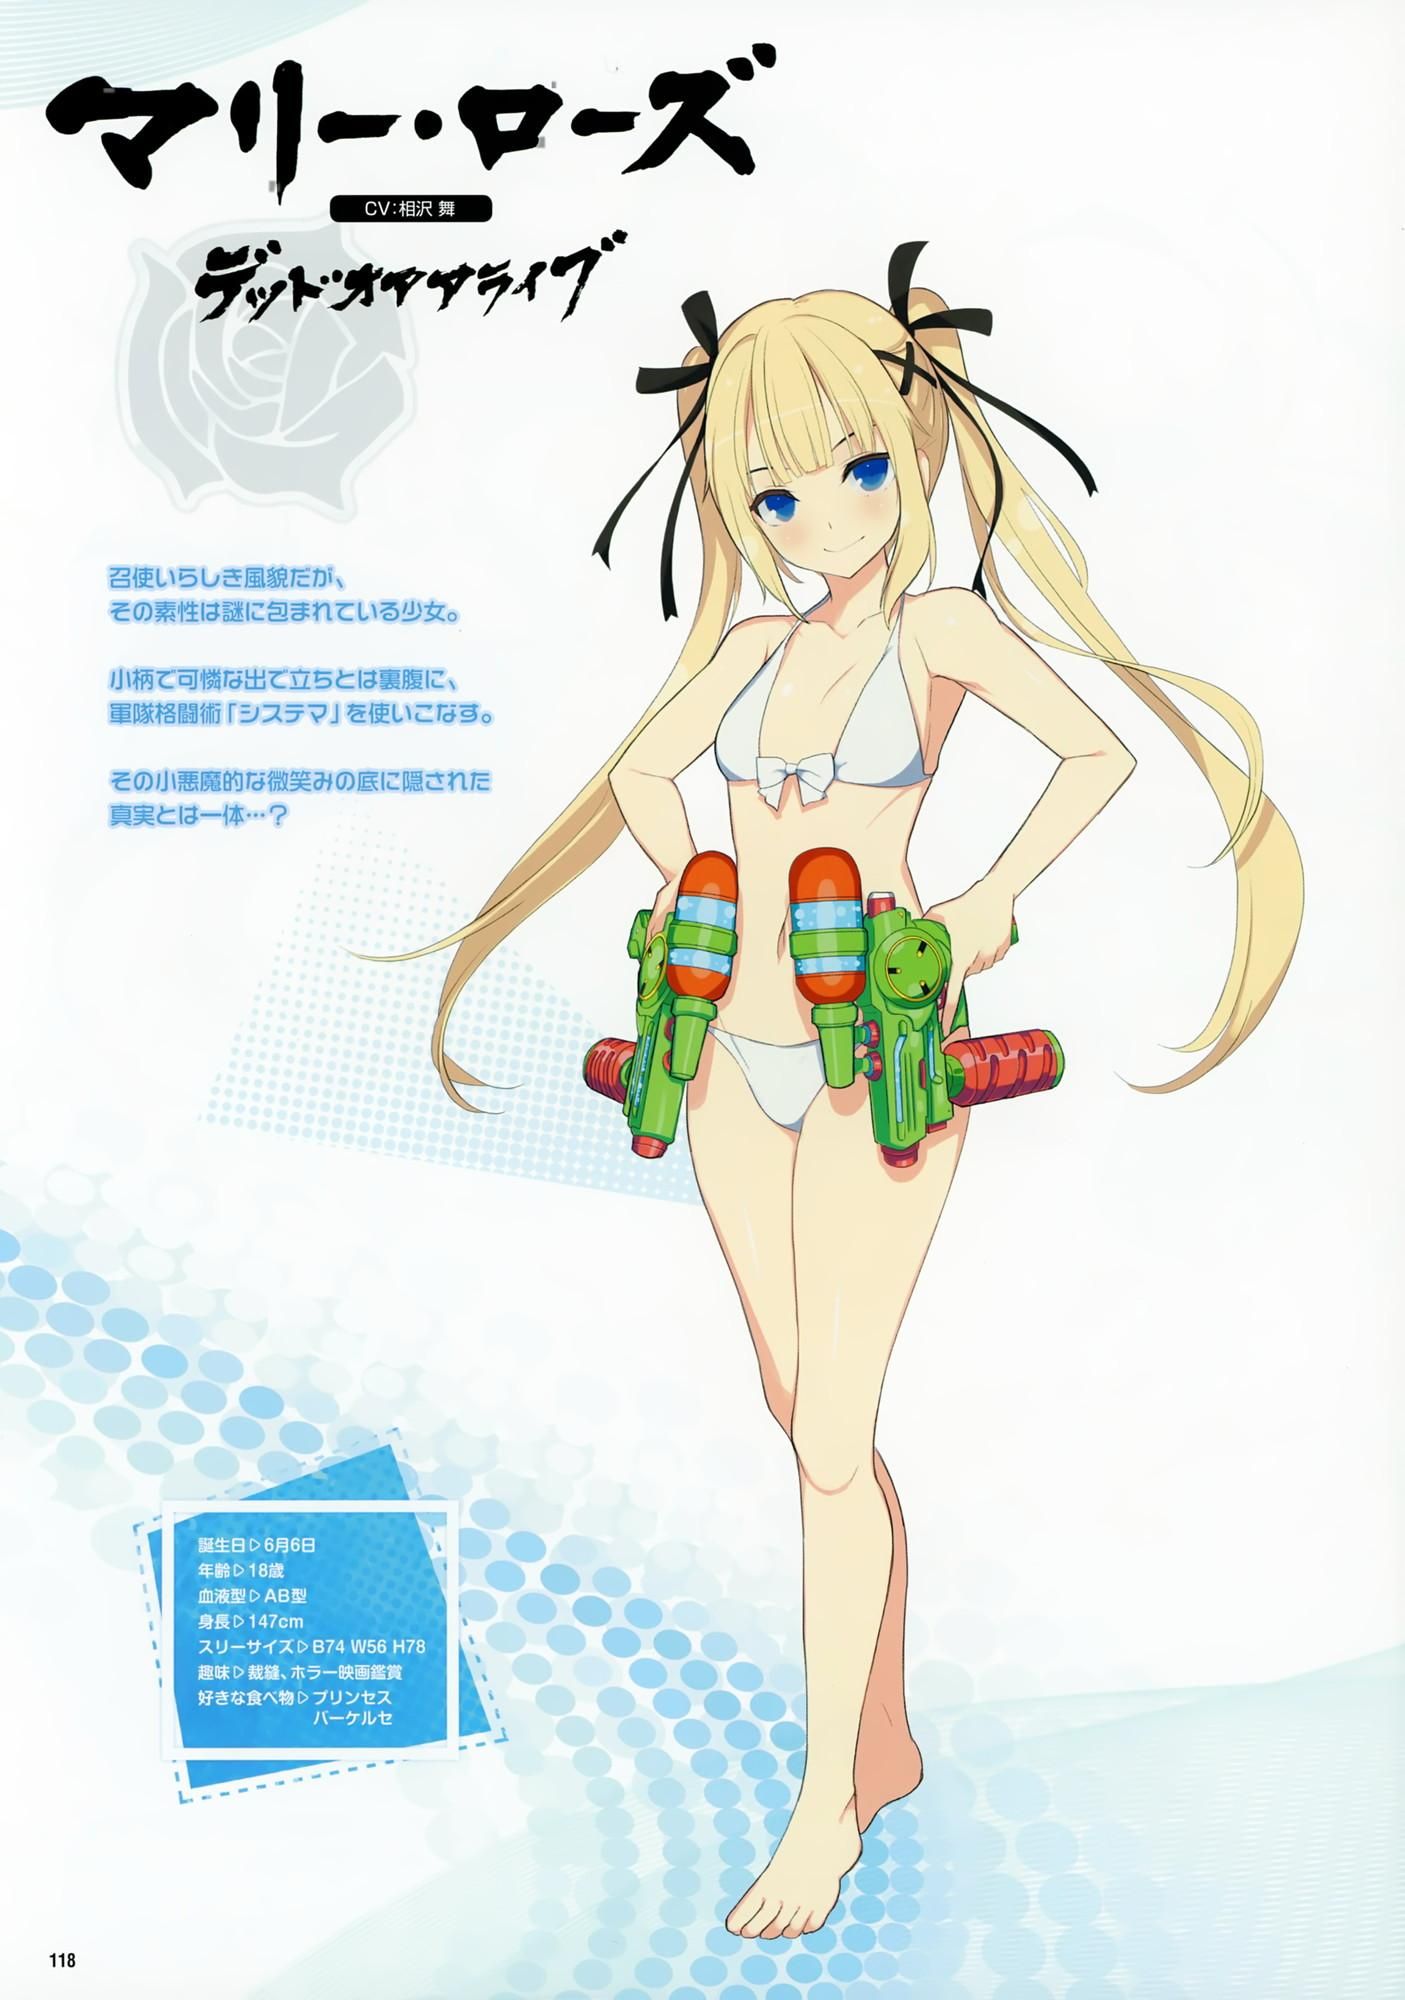 Dead or Alive Erotic Cartoon Marie Rose's service S ●X immediately pulls out! - Saddle! 5